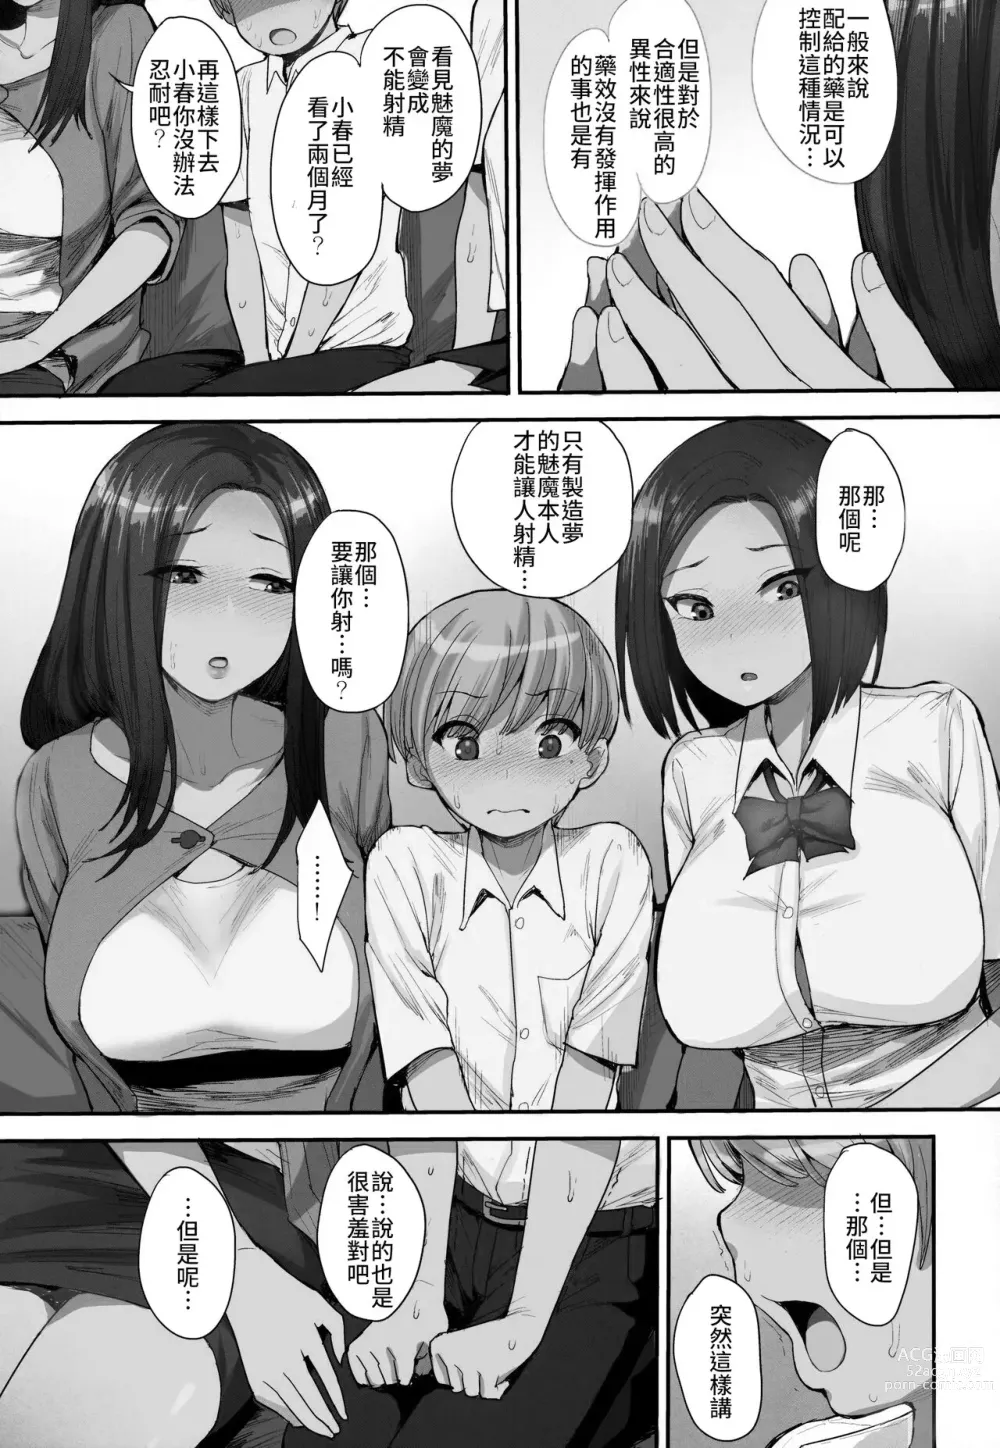 Page 10 of doujinshi 魅魔鄰居 (decensored)